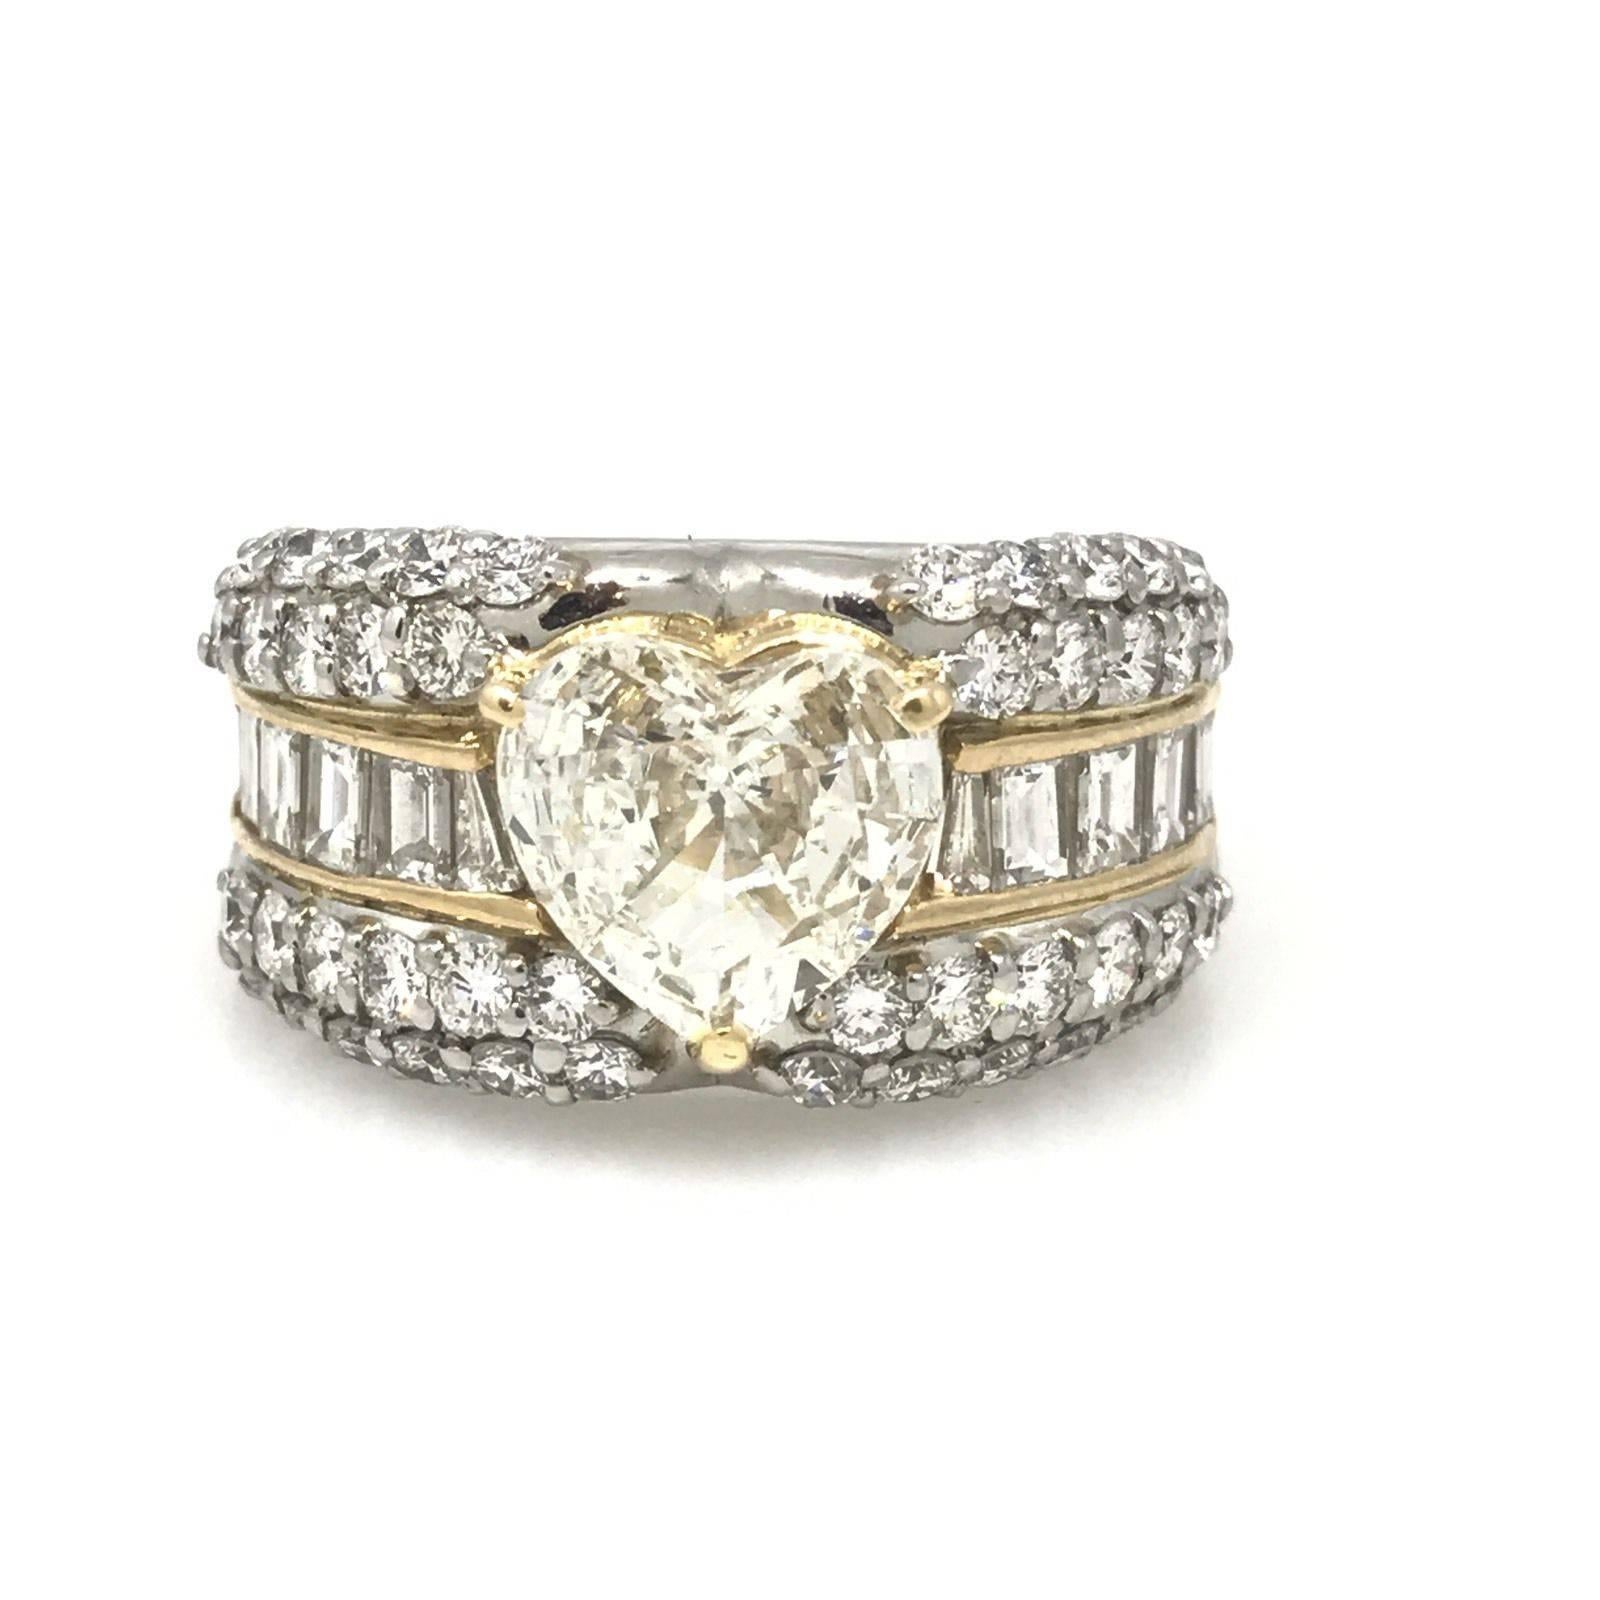 3.62 Carat Heart-Shape Diamond Platinum Ring with Rounds and Baguettes For Sale 1